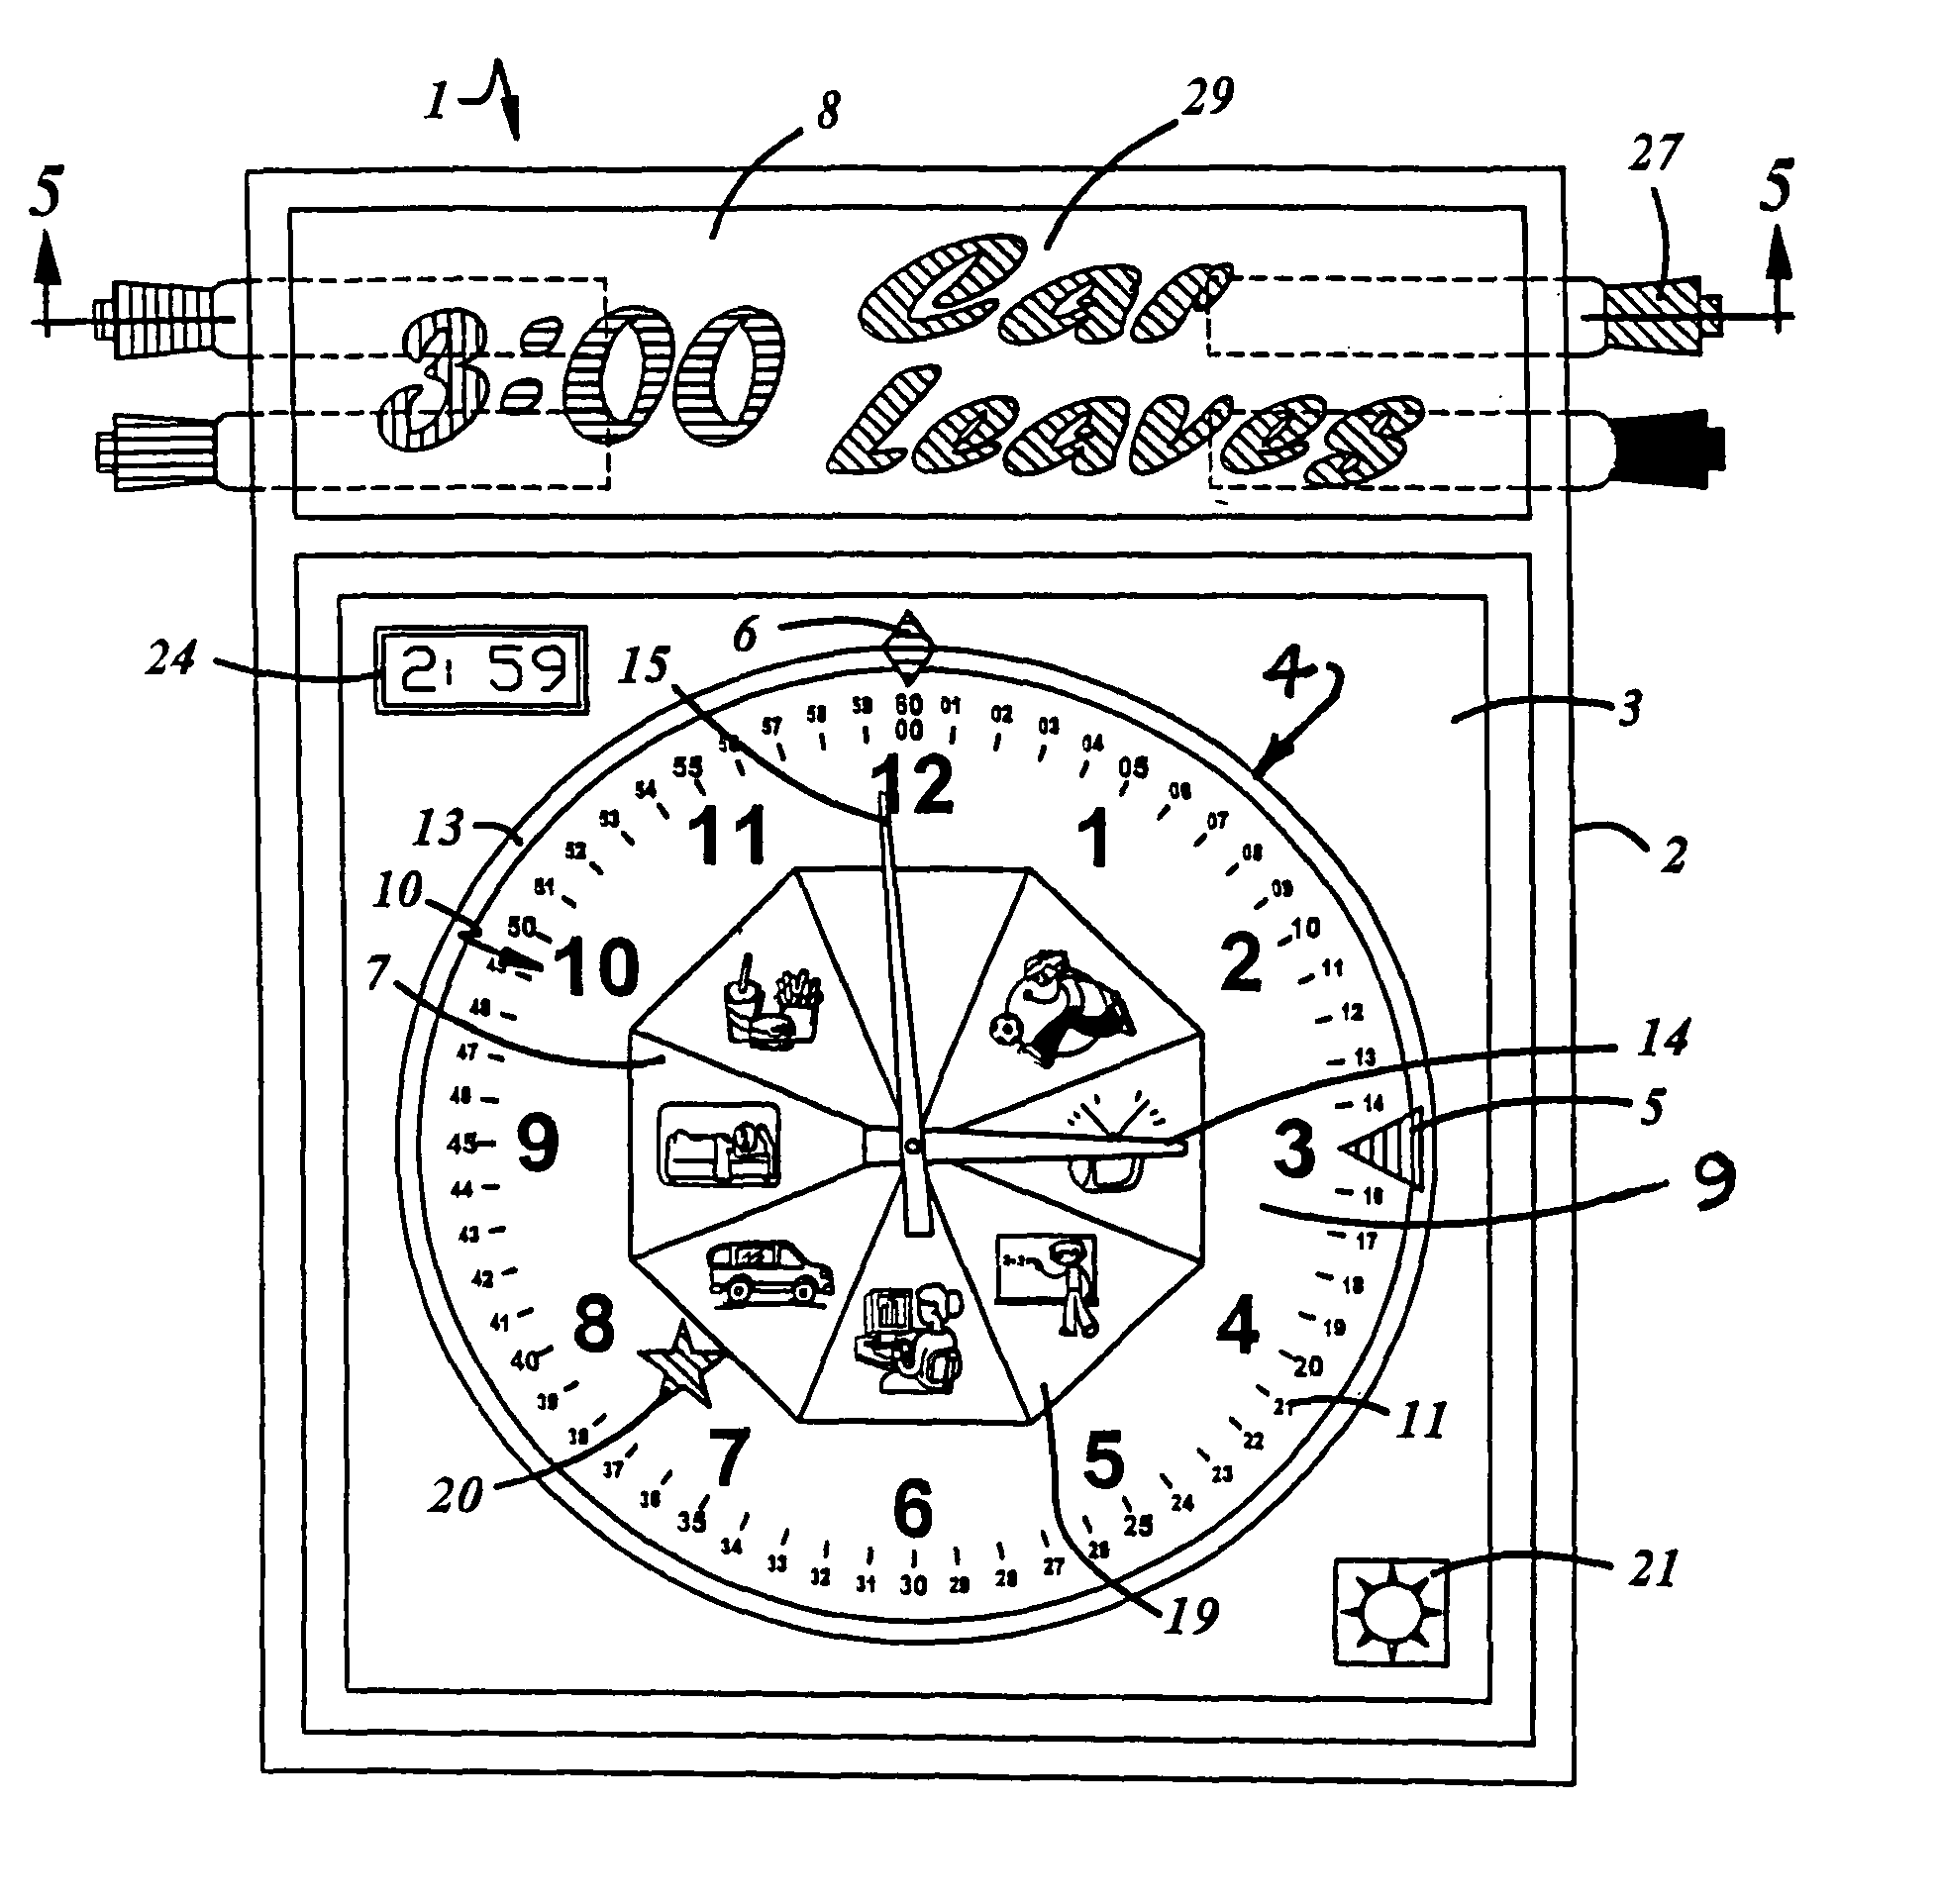 Apparatus for relating time to activity